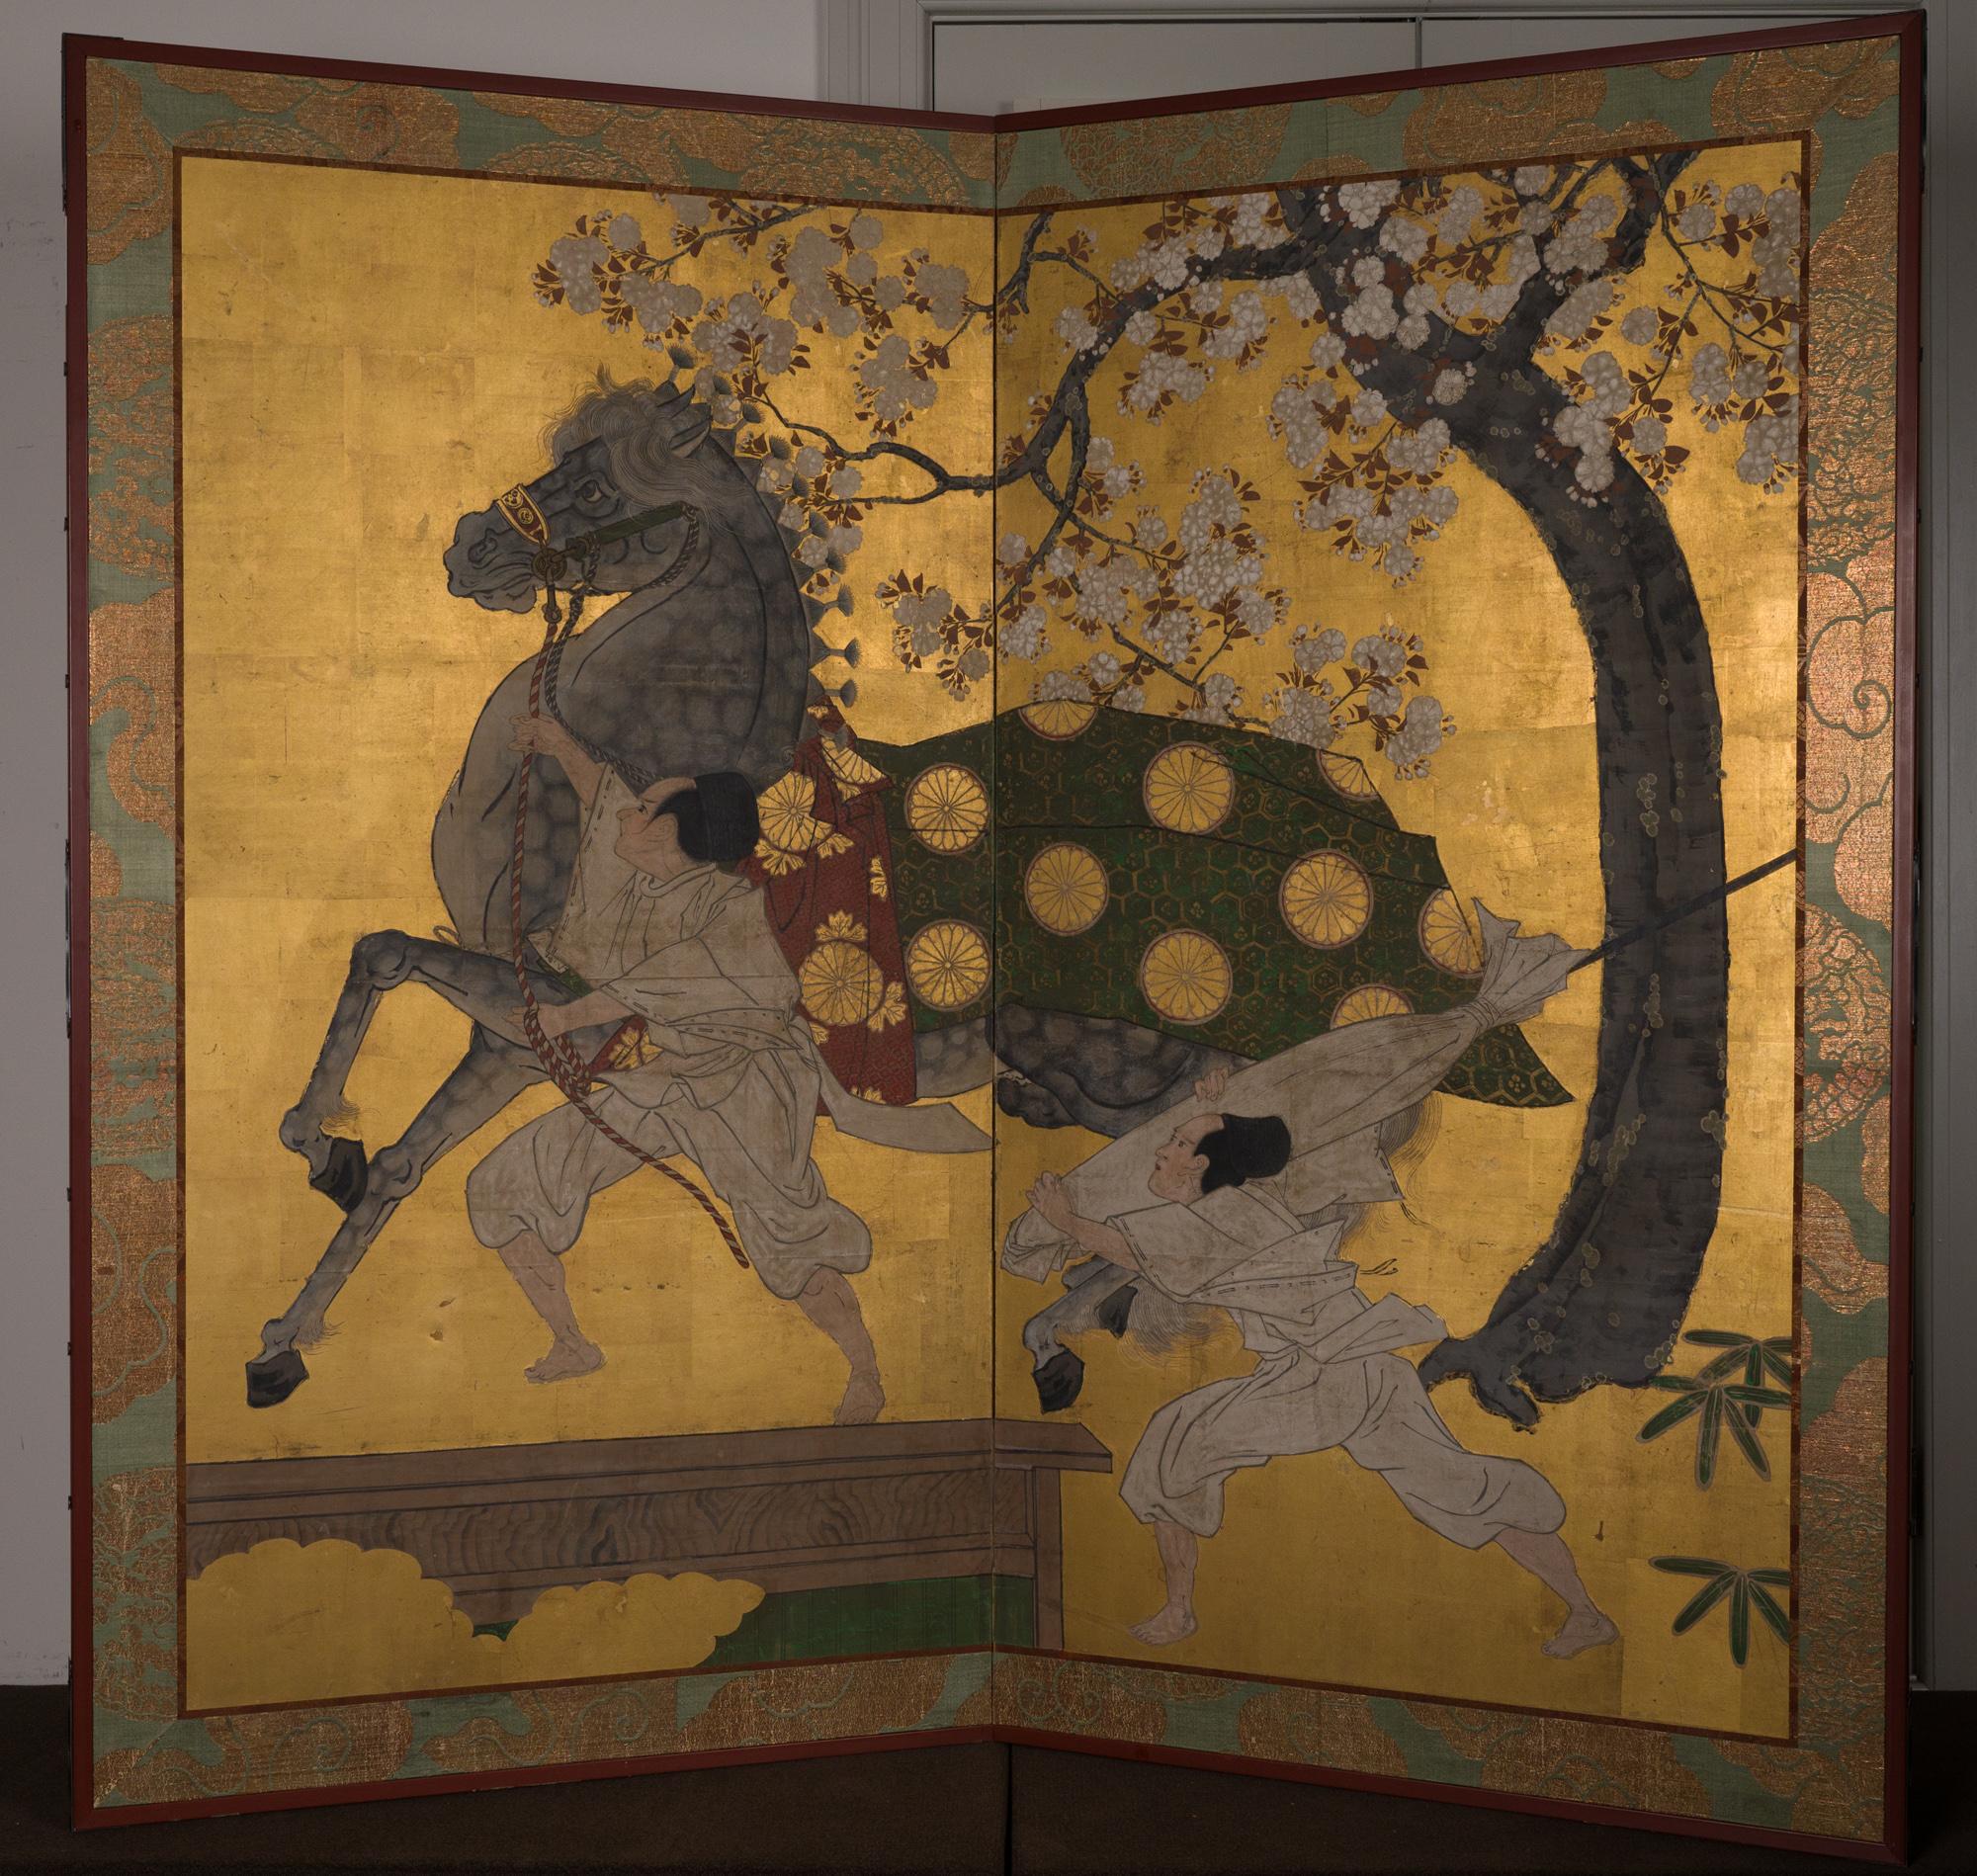 Mineral pigments on gold leaf. Kano School Painting. Brocade is beautiful gold embroidered, from 18th century fabric.